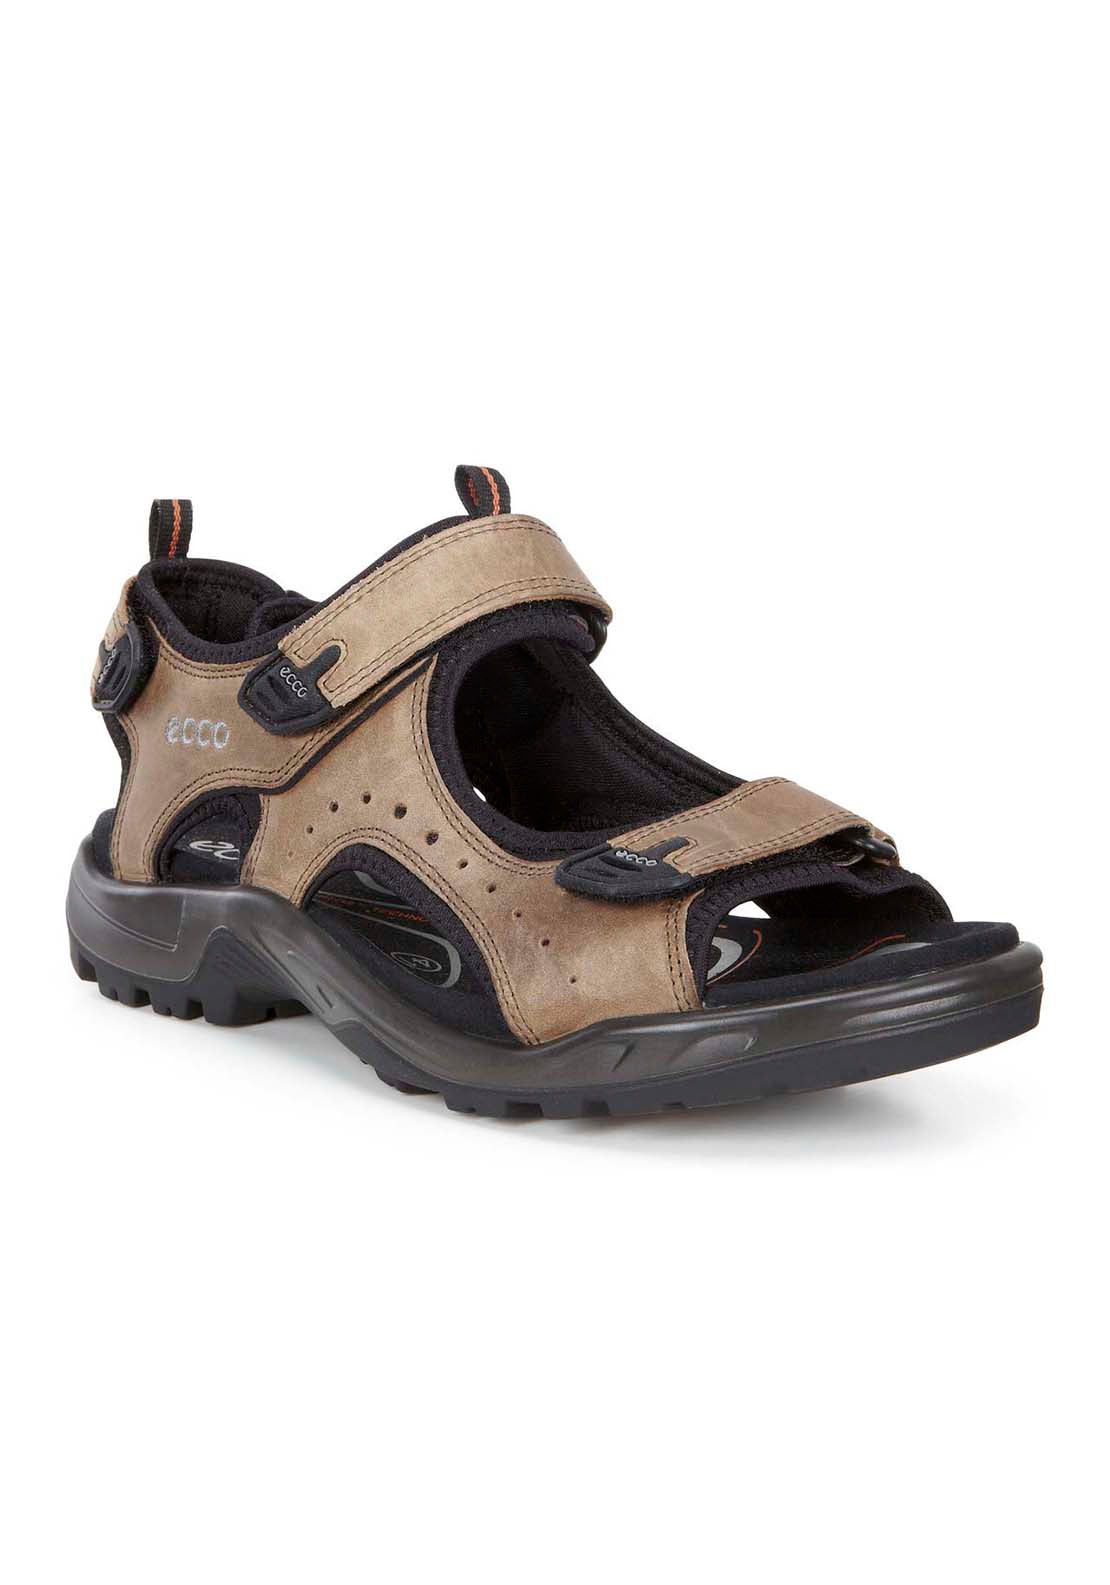 Ecco Offroad Sandal - Brown 1 Shaws Department Stores